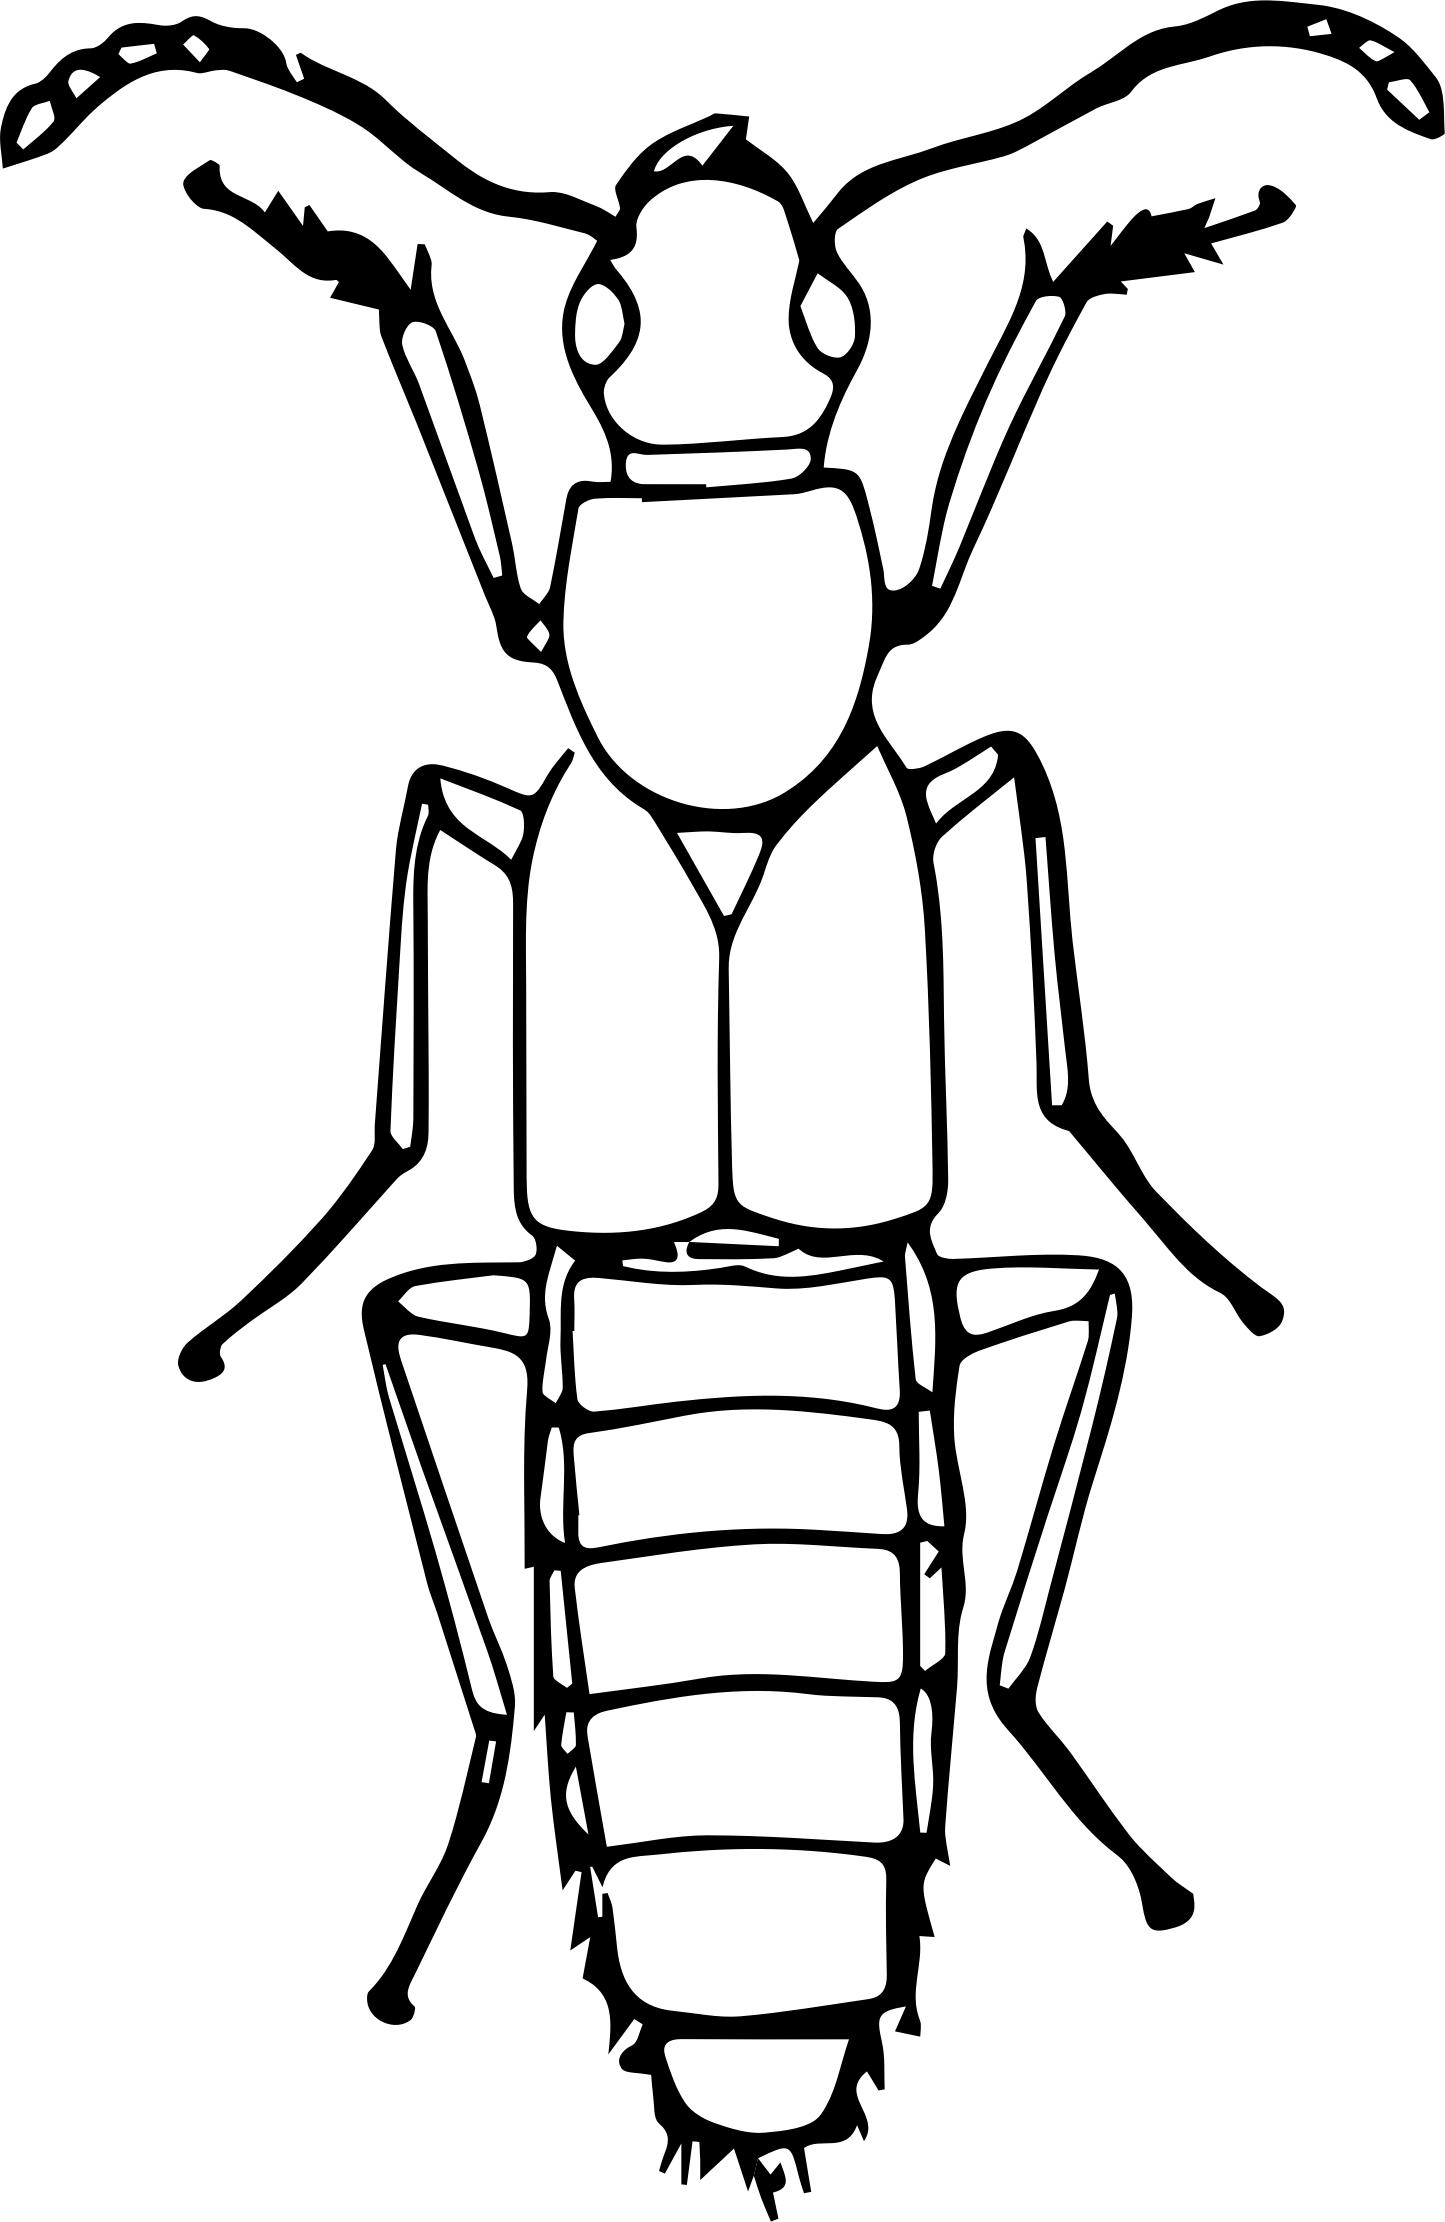 Rove beetle png